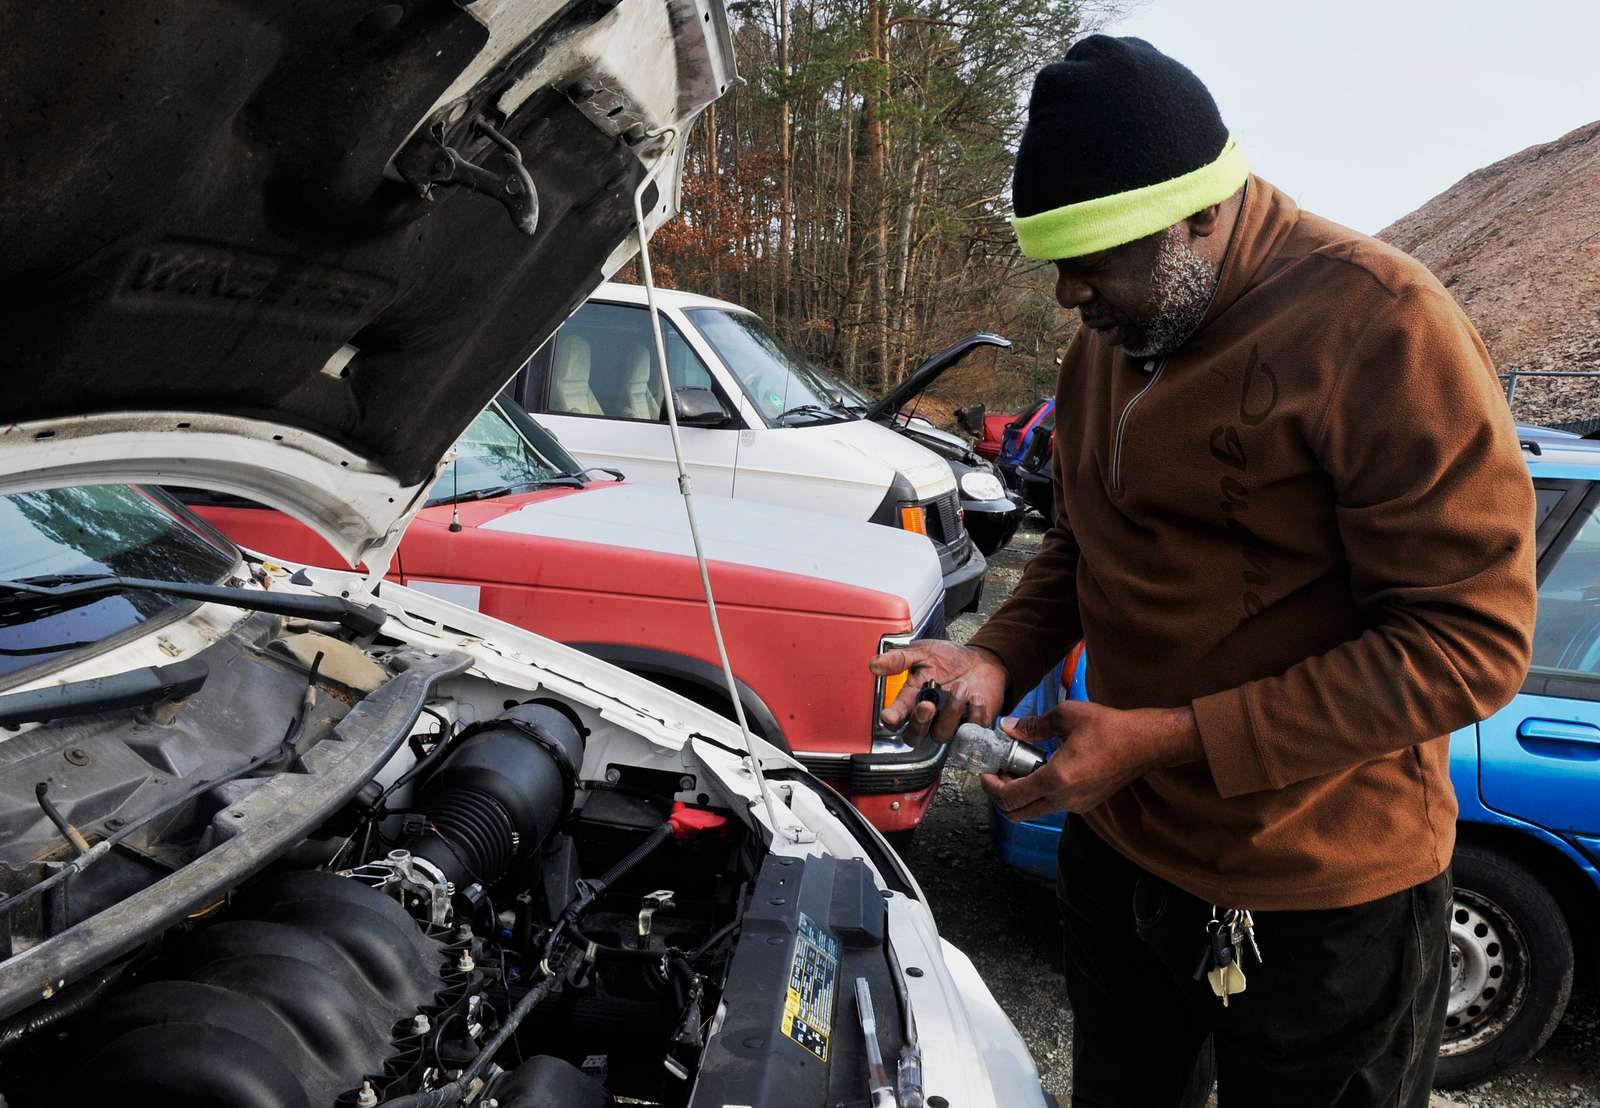 Black man wearing a brown jacket and knit cap removes a part from an automobile engine